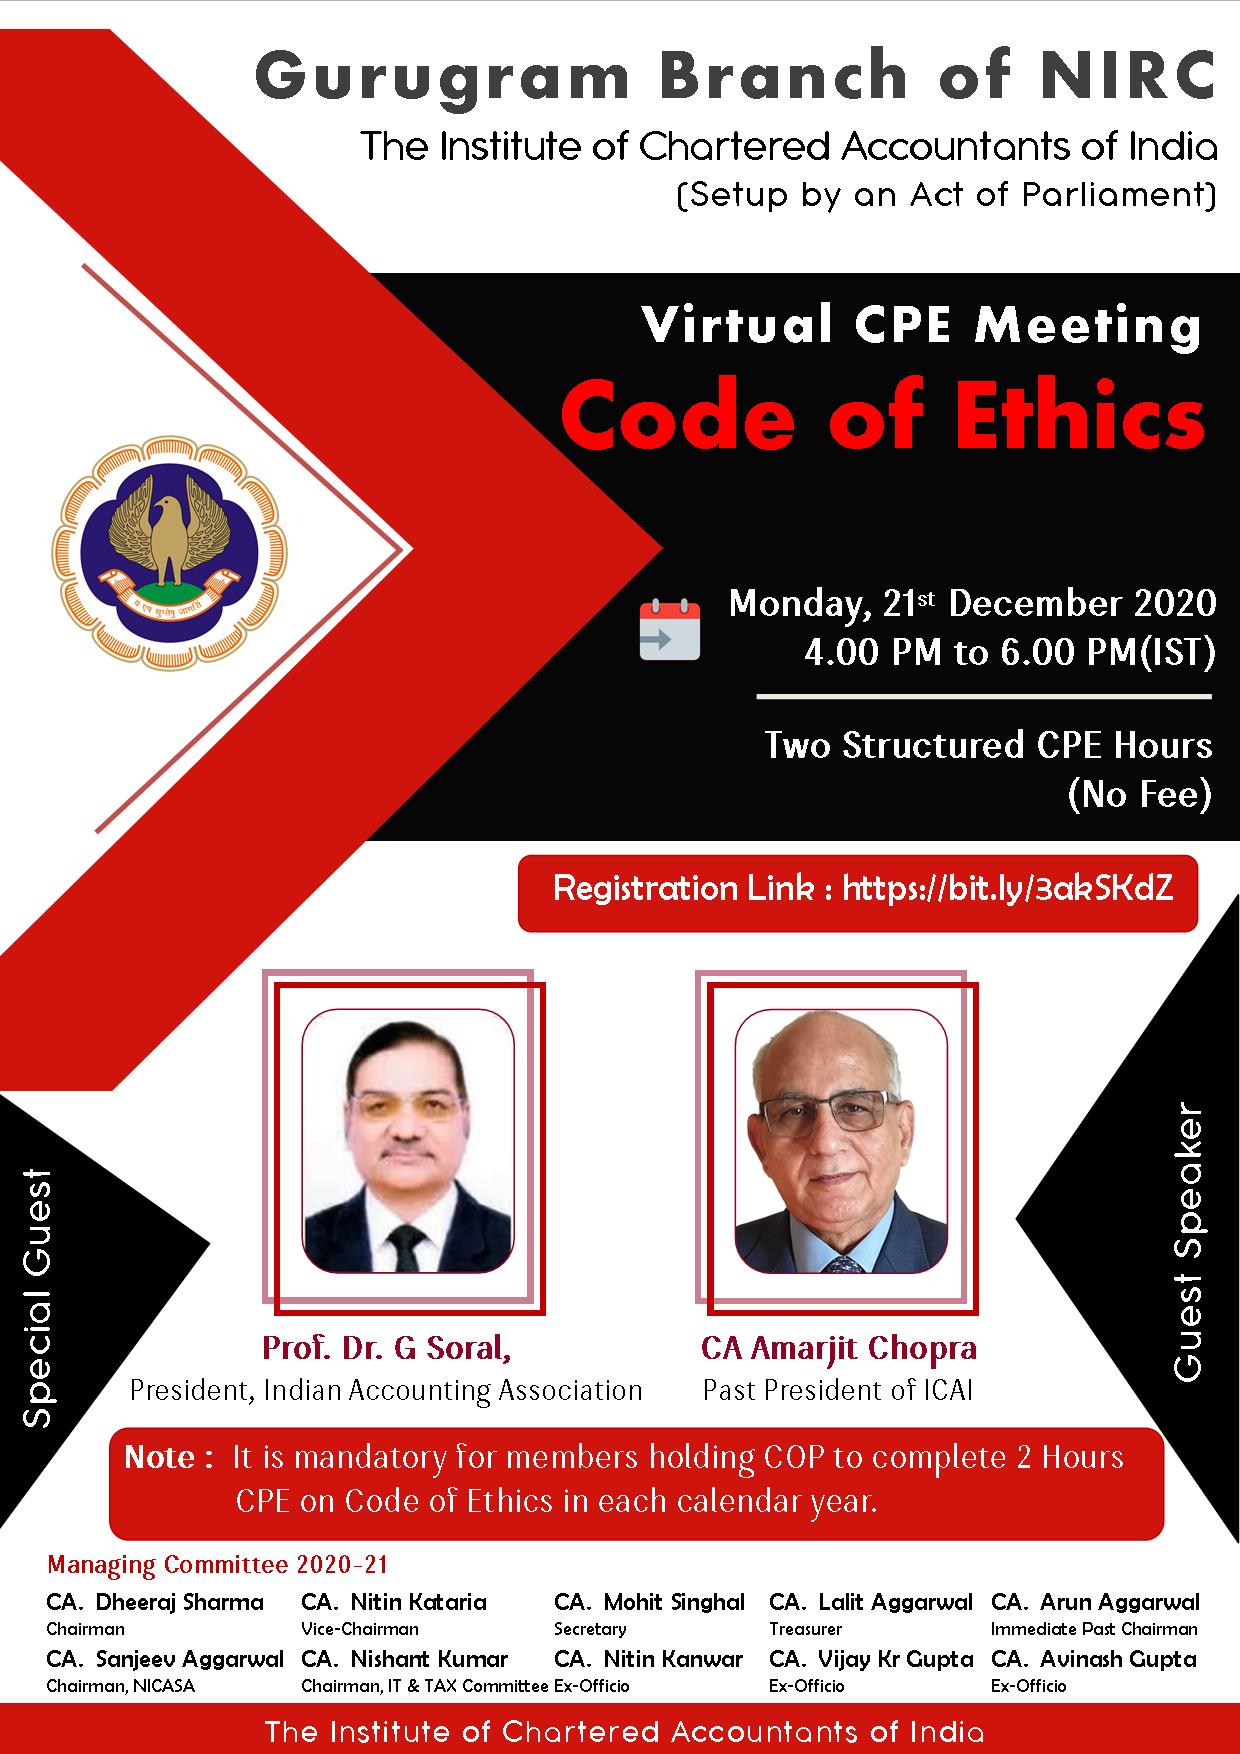 Virtual CPE Meeting on Code of Ethics